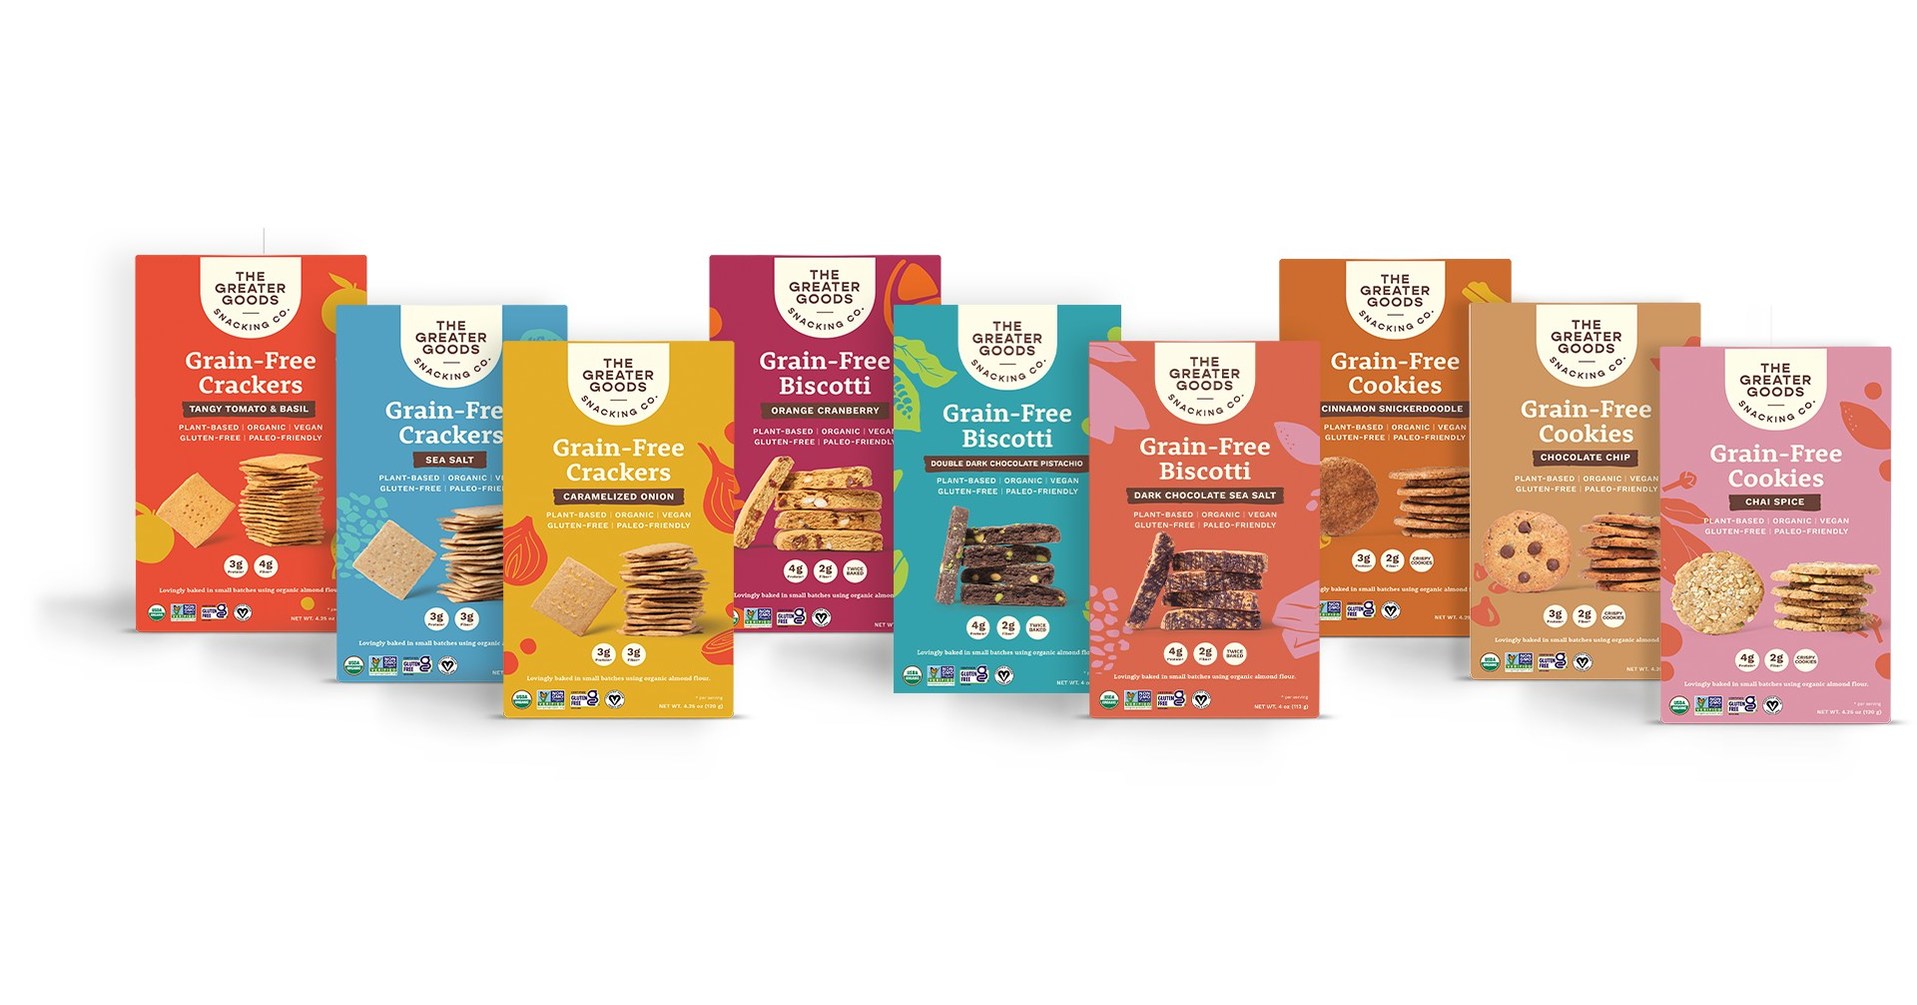 https://mma.prnewswire.com/media/1865048/The_Greater_Goods_Snacking_Co_launches_with_three_product_lines___crackers_biscotti_and_cookies.jpg?p=facebook